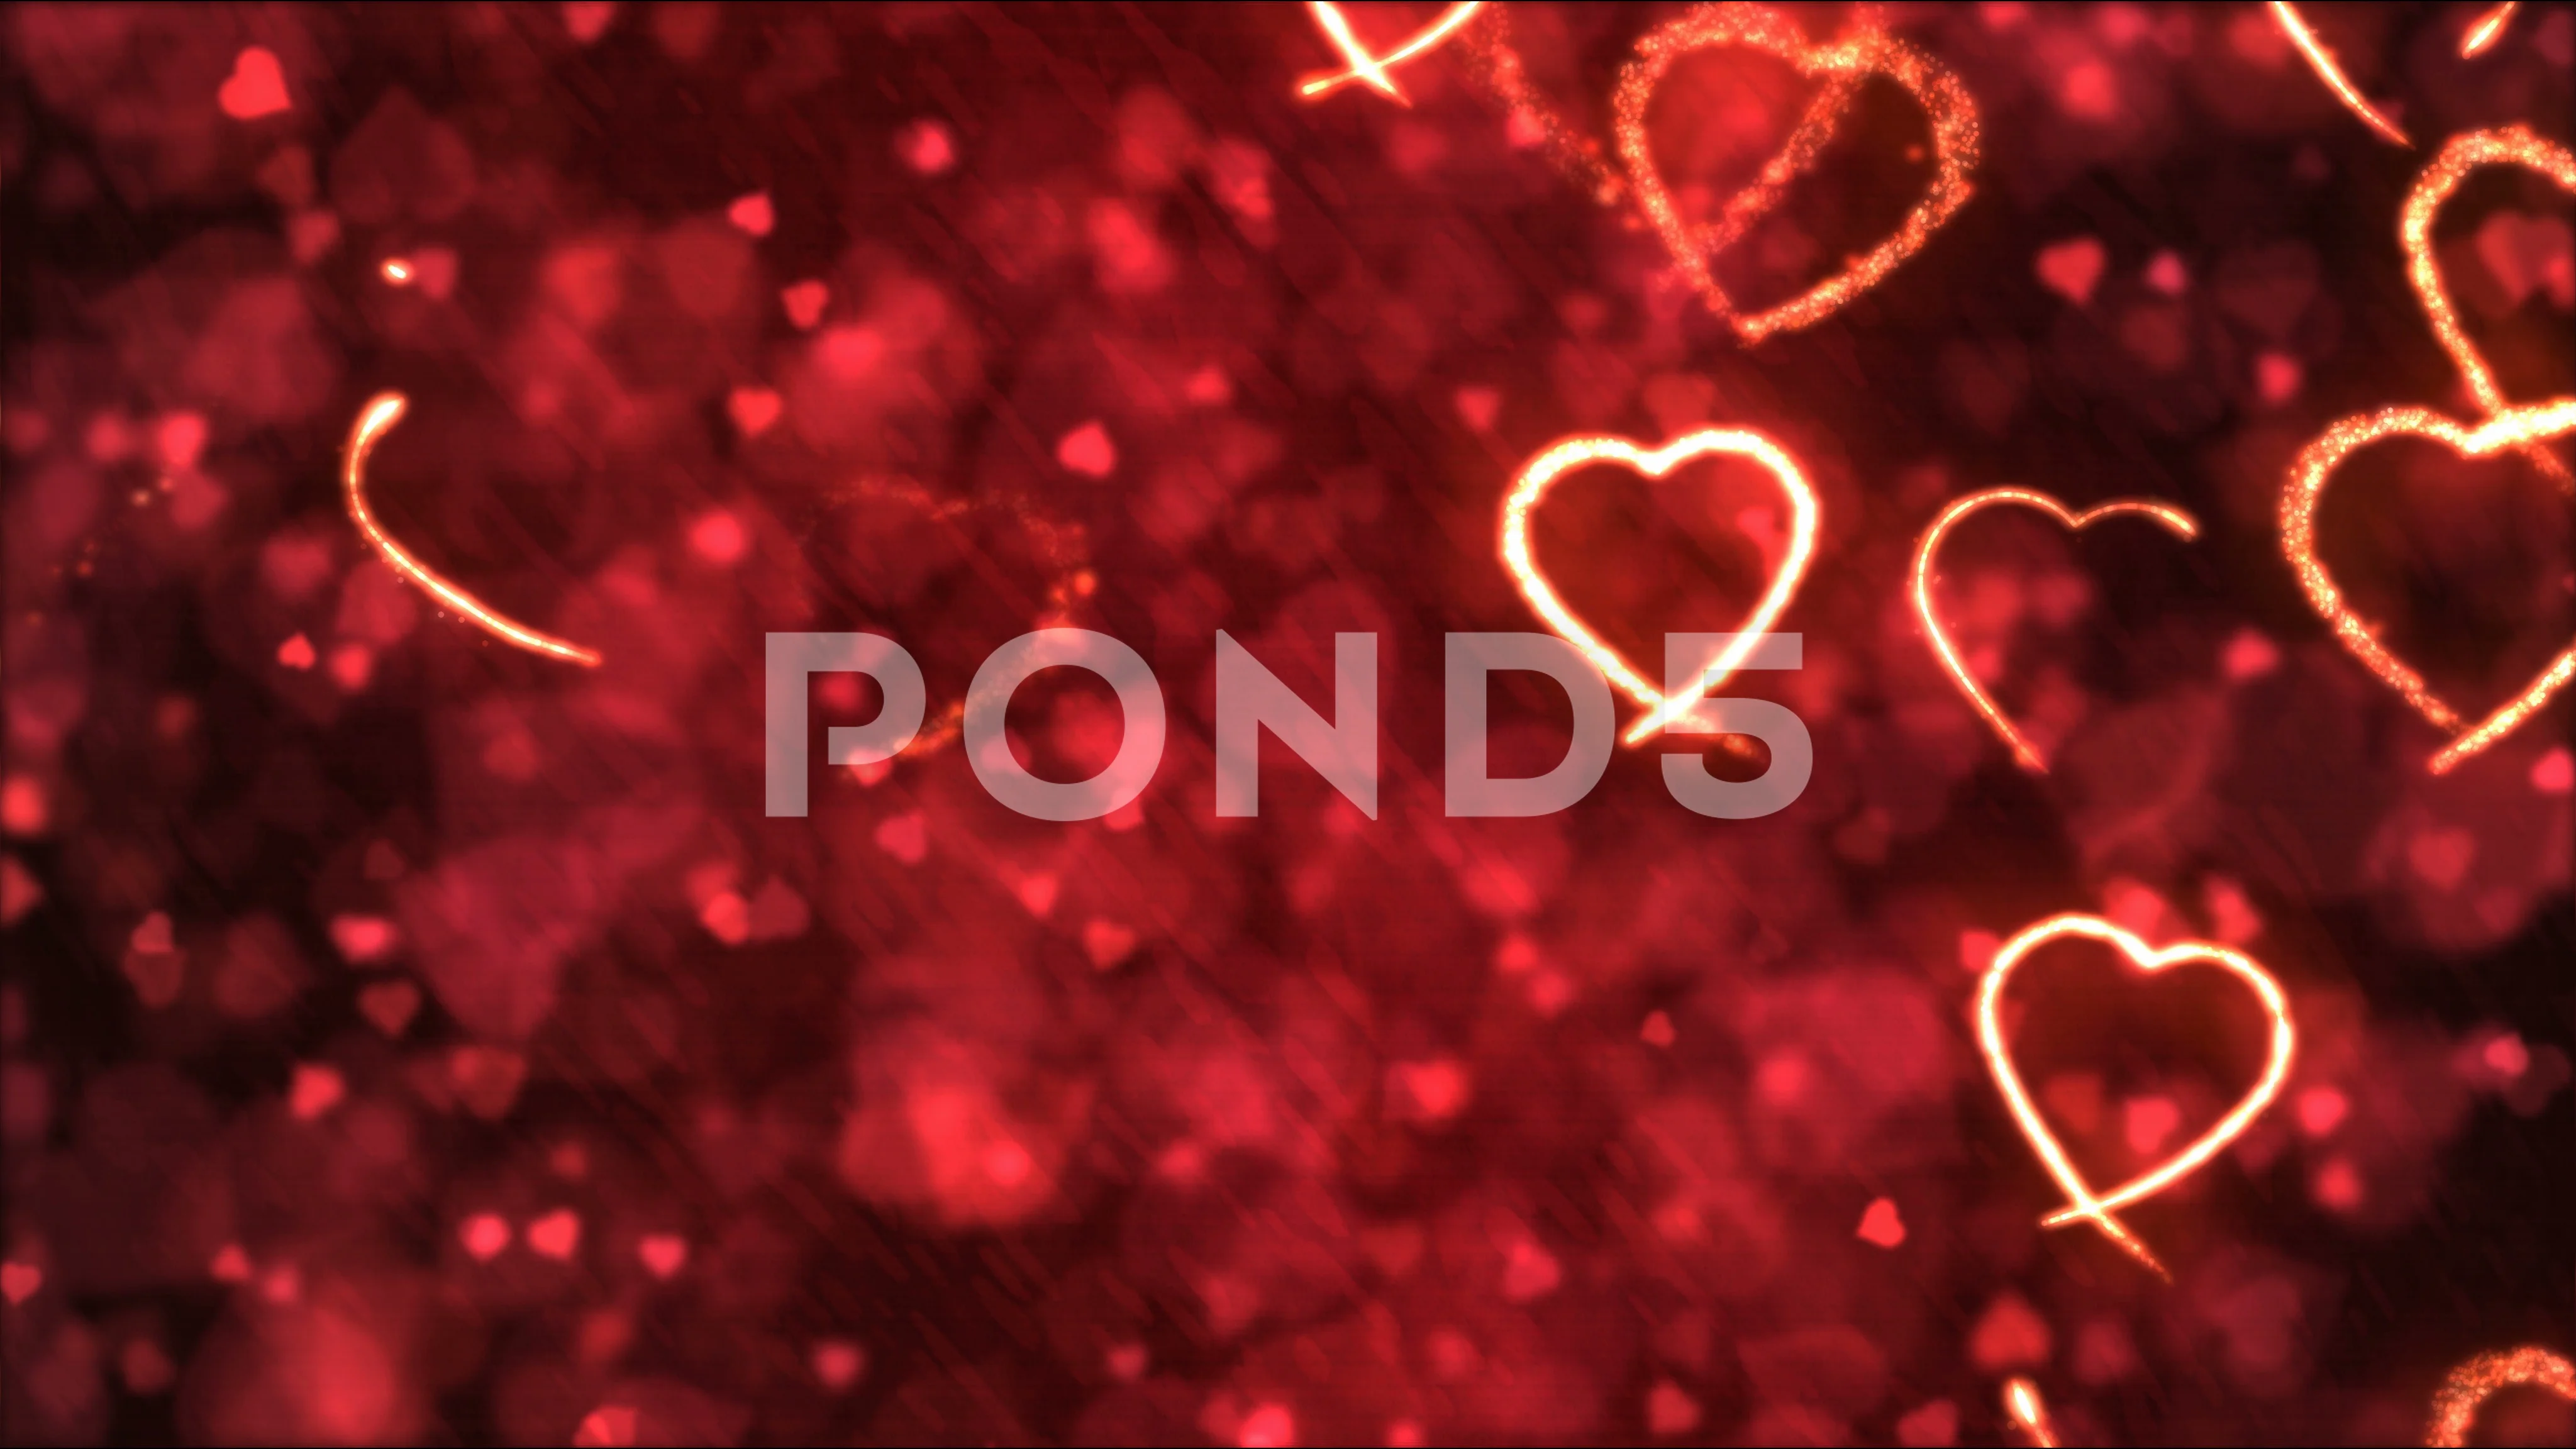 Heart Animation In Slow Motion Stock Video Footage | Royalty Free Heart  Animation In Slow Motion Videos | Pond5